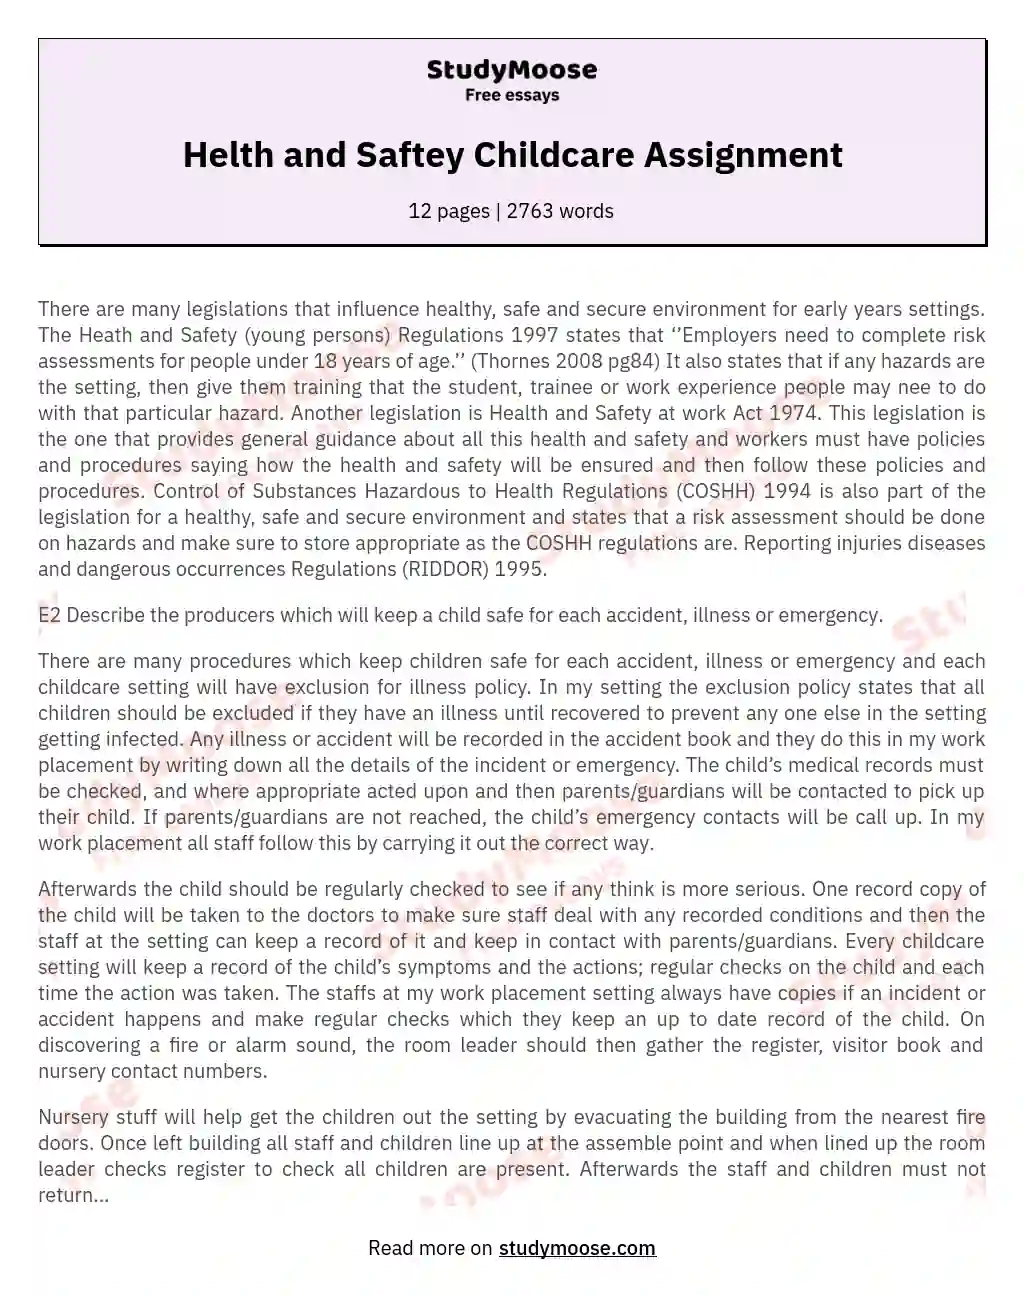 Helth and Saftey Childcare Assignment essay